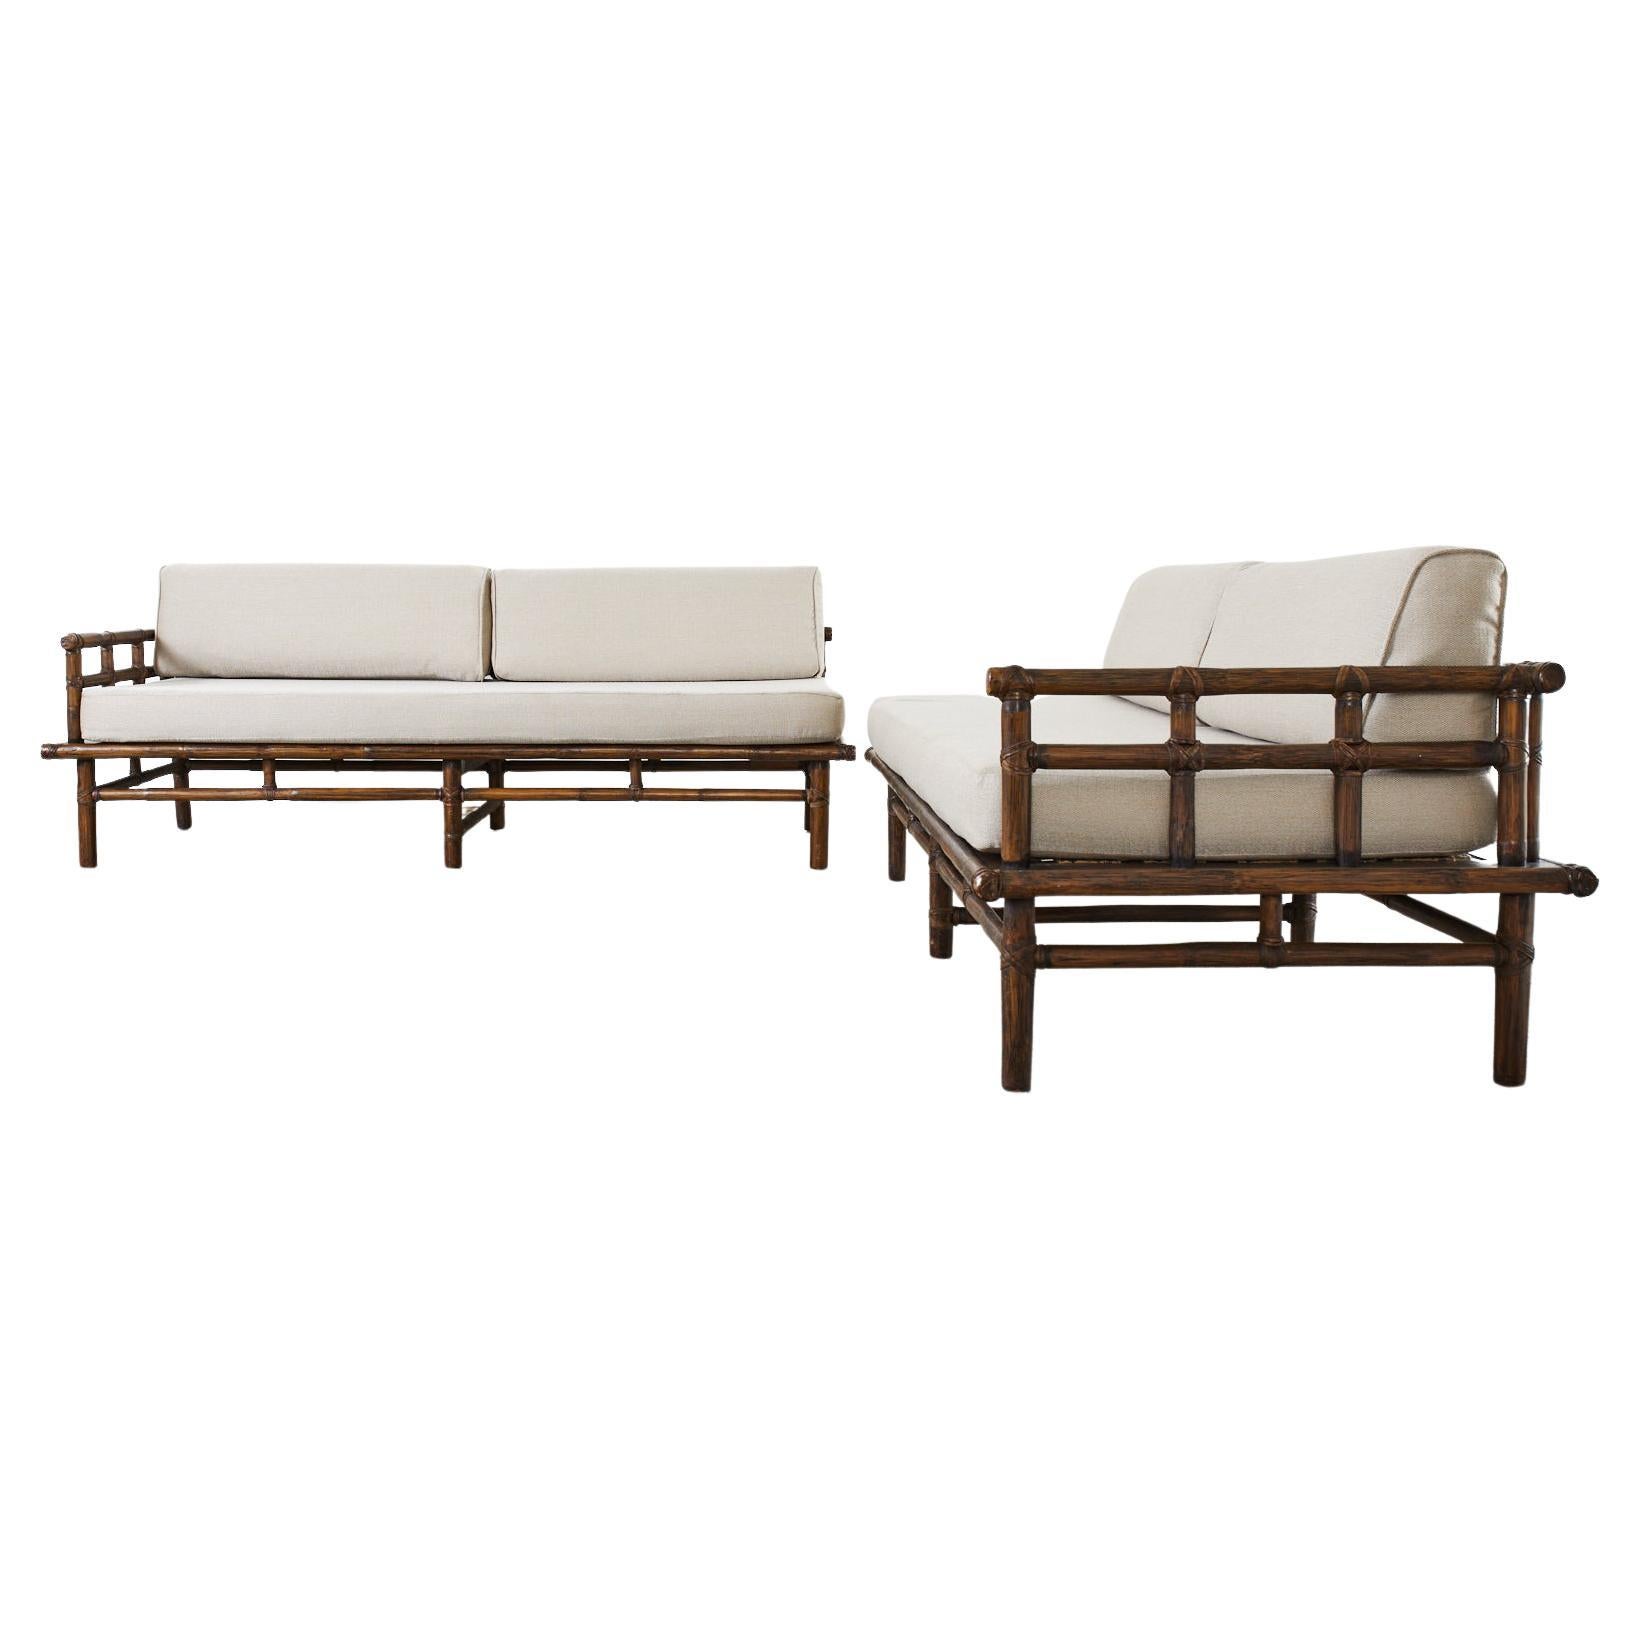 Pair of Matching McGuire Organic Modern Rattan Daybed Sofas